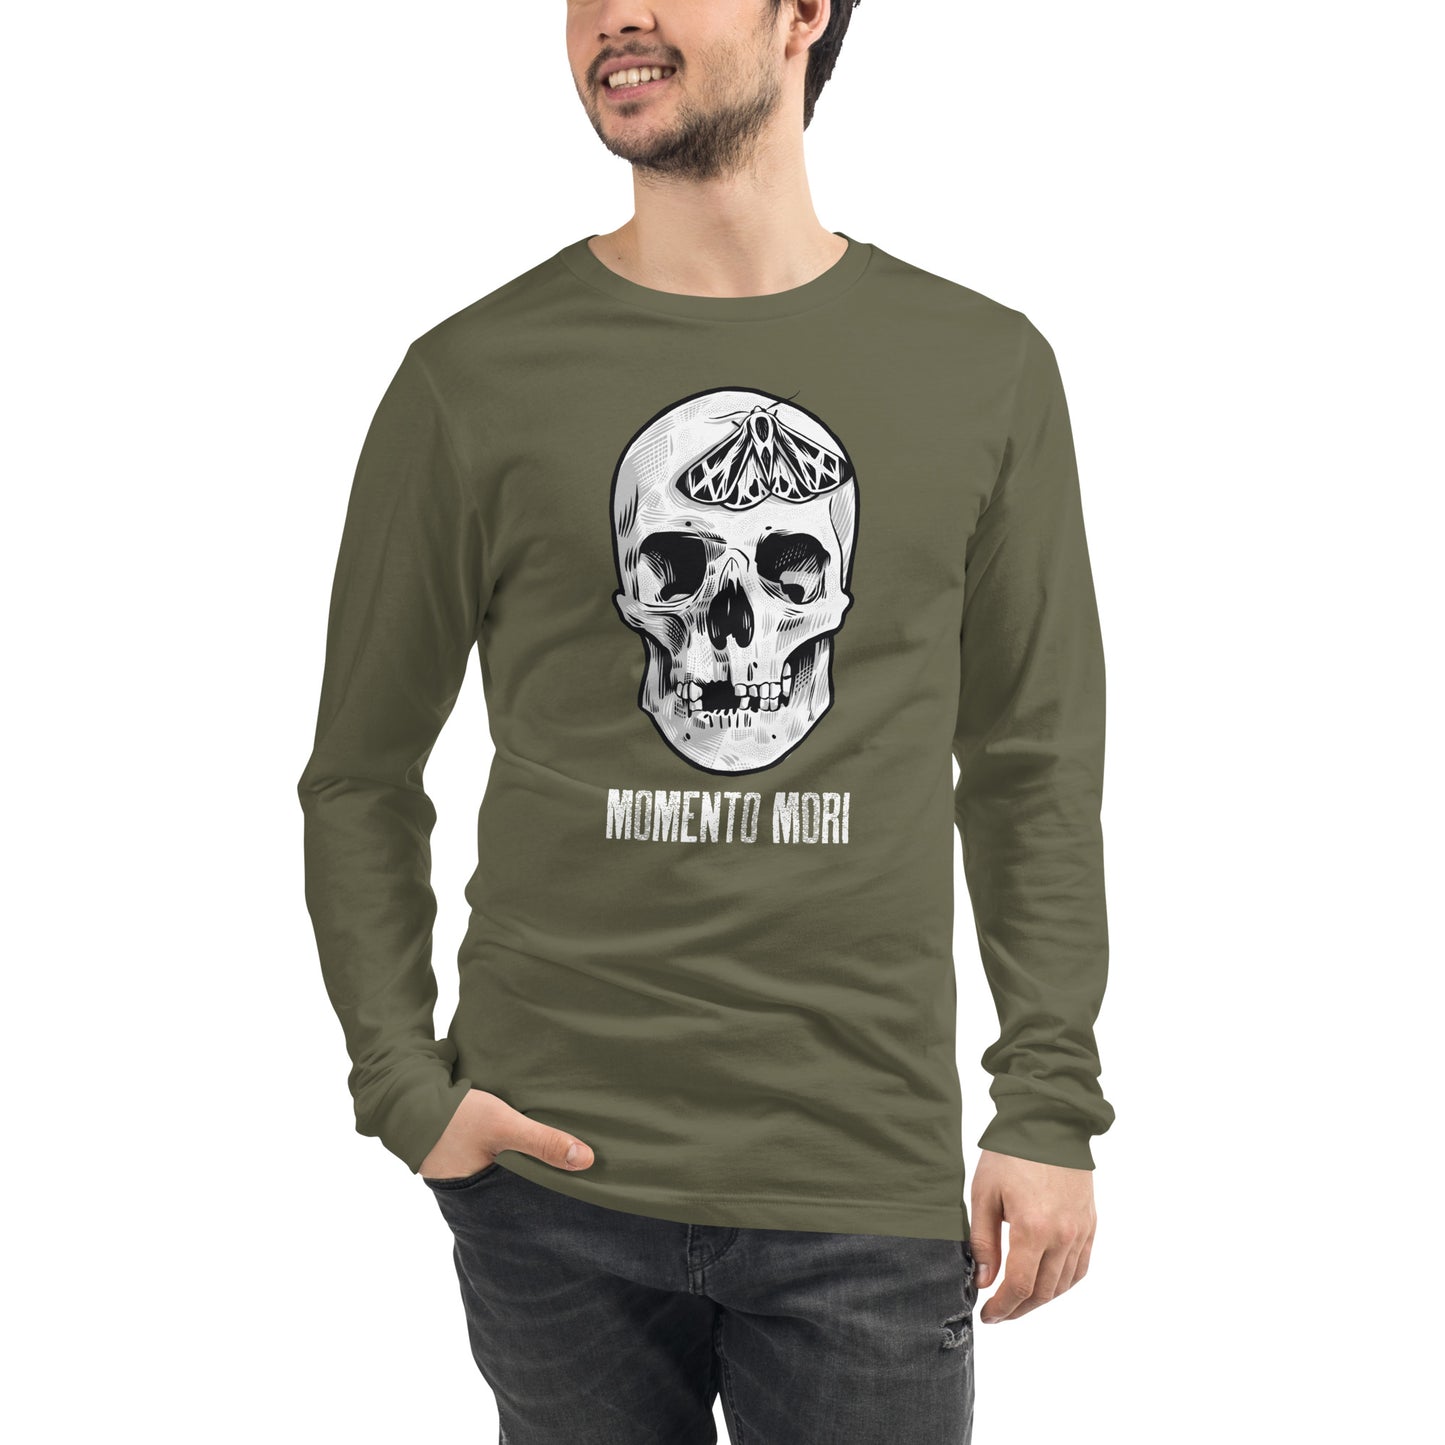 Ethical unisex shirt with life contemplation theme